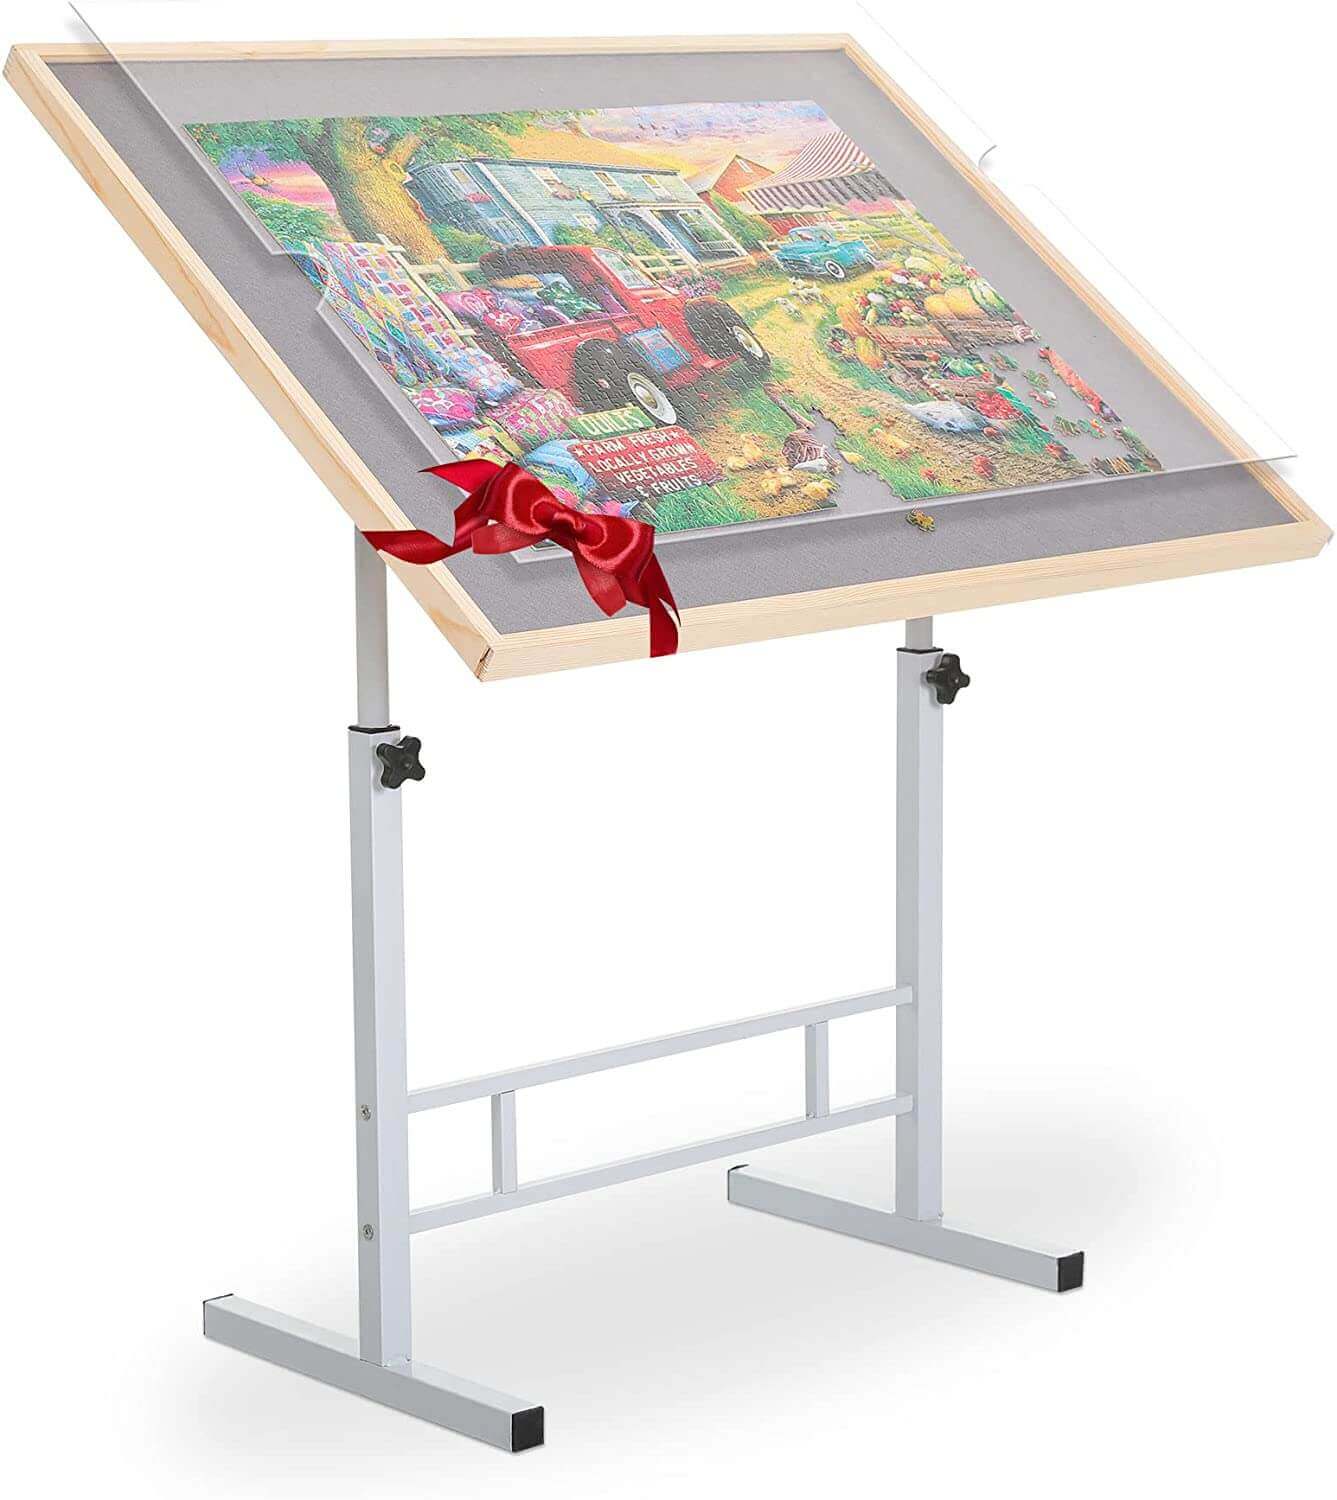 Fanwer 1500 Piece Jigsaw Puzzle Tables Board with Drawers